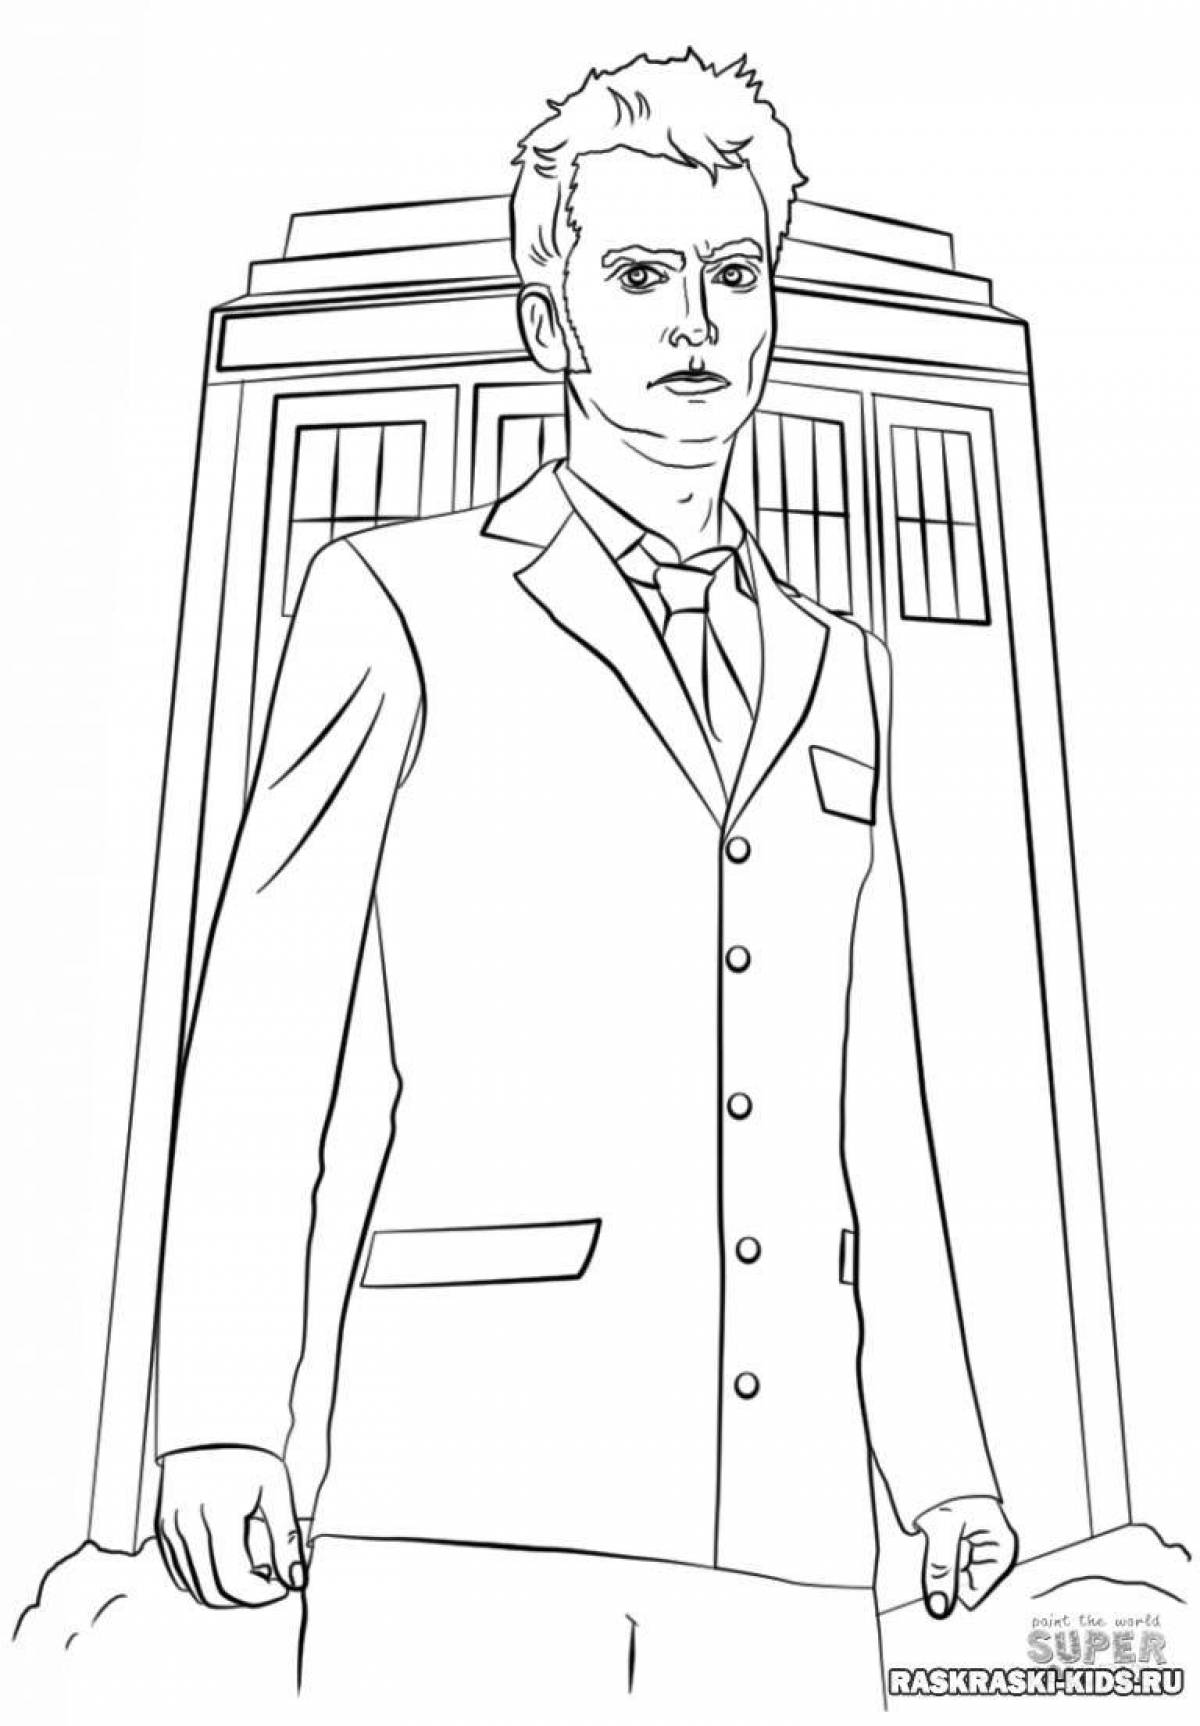 Fancy doctor who coloring book